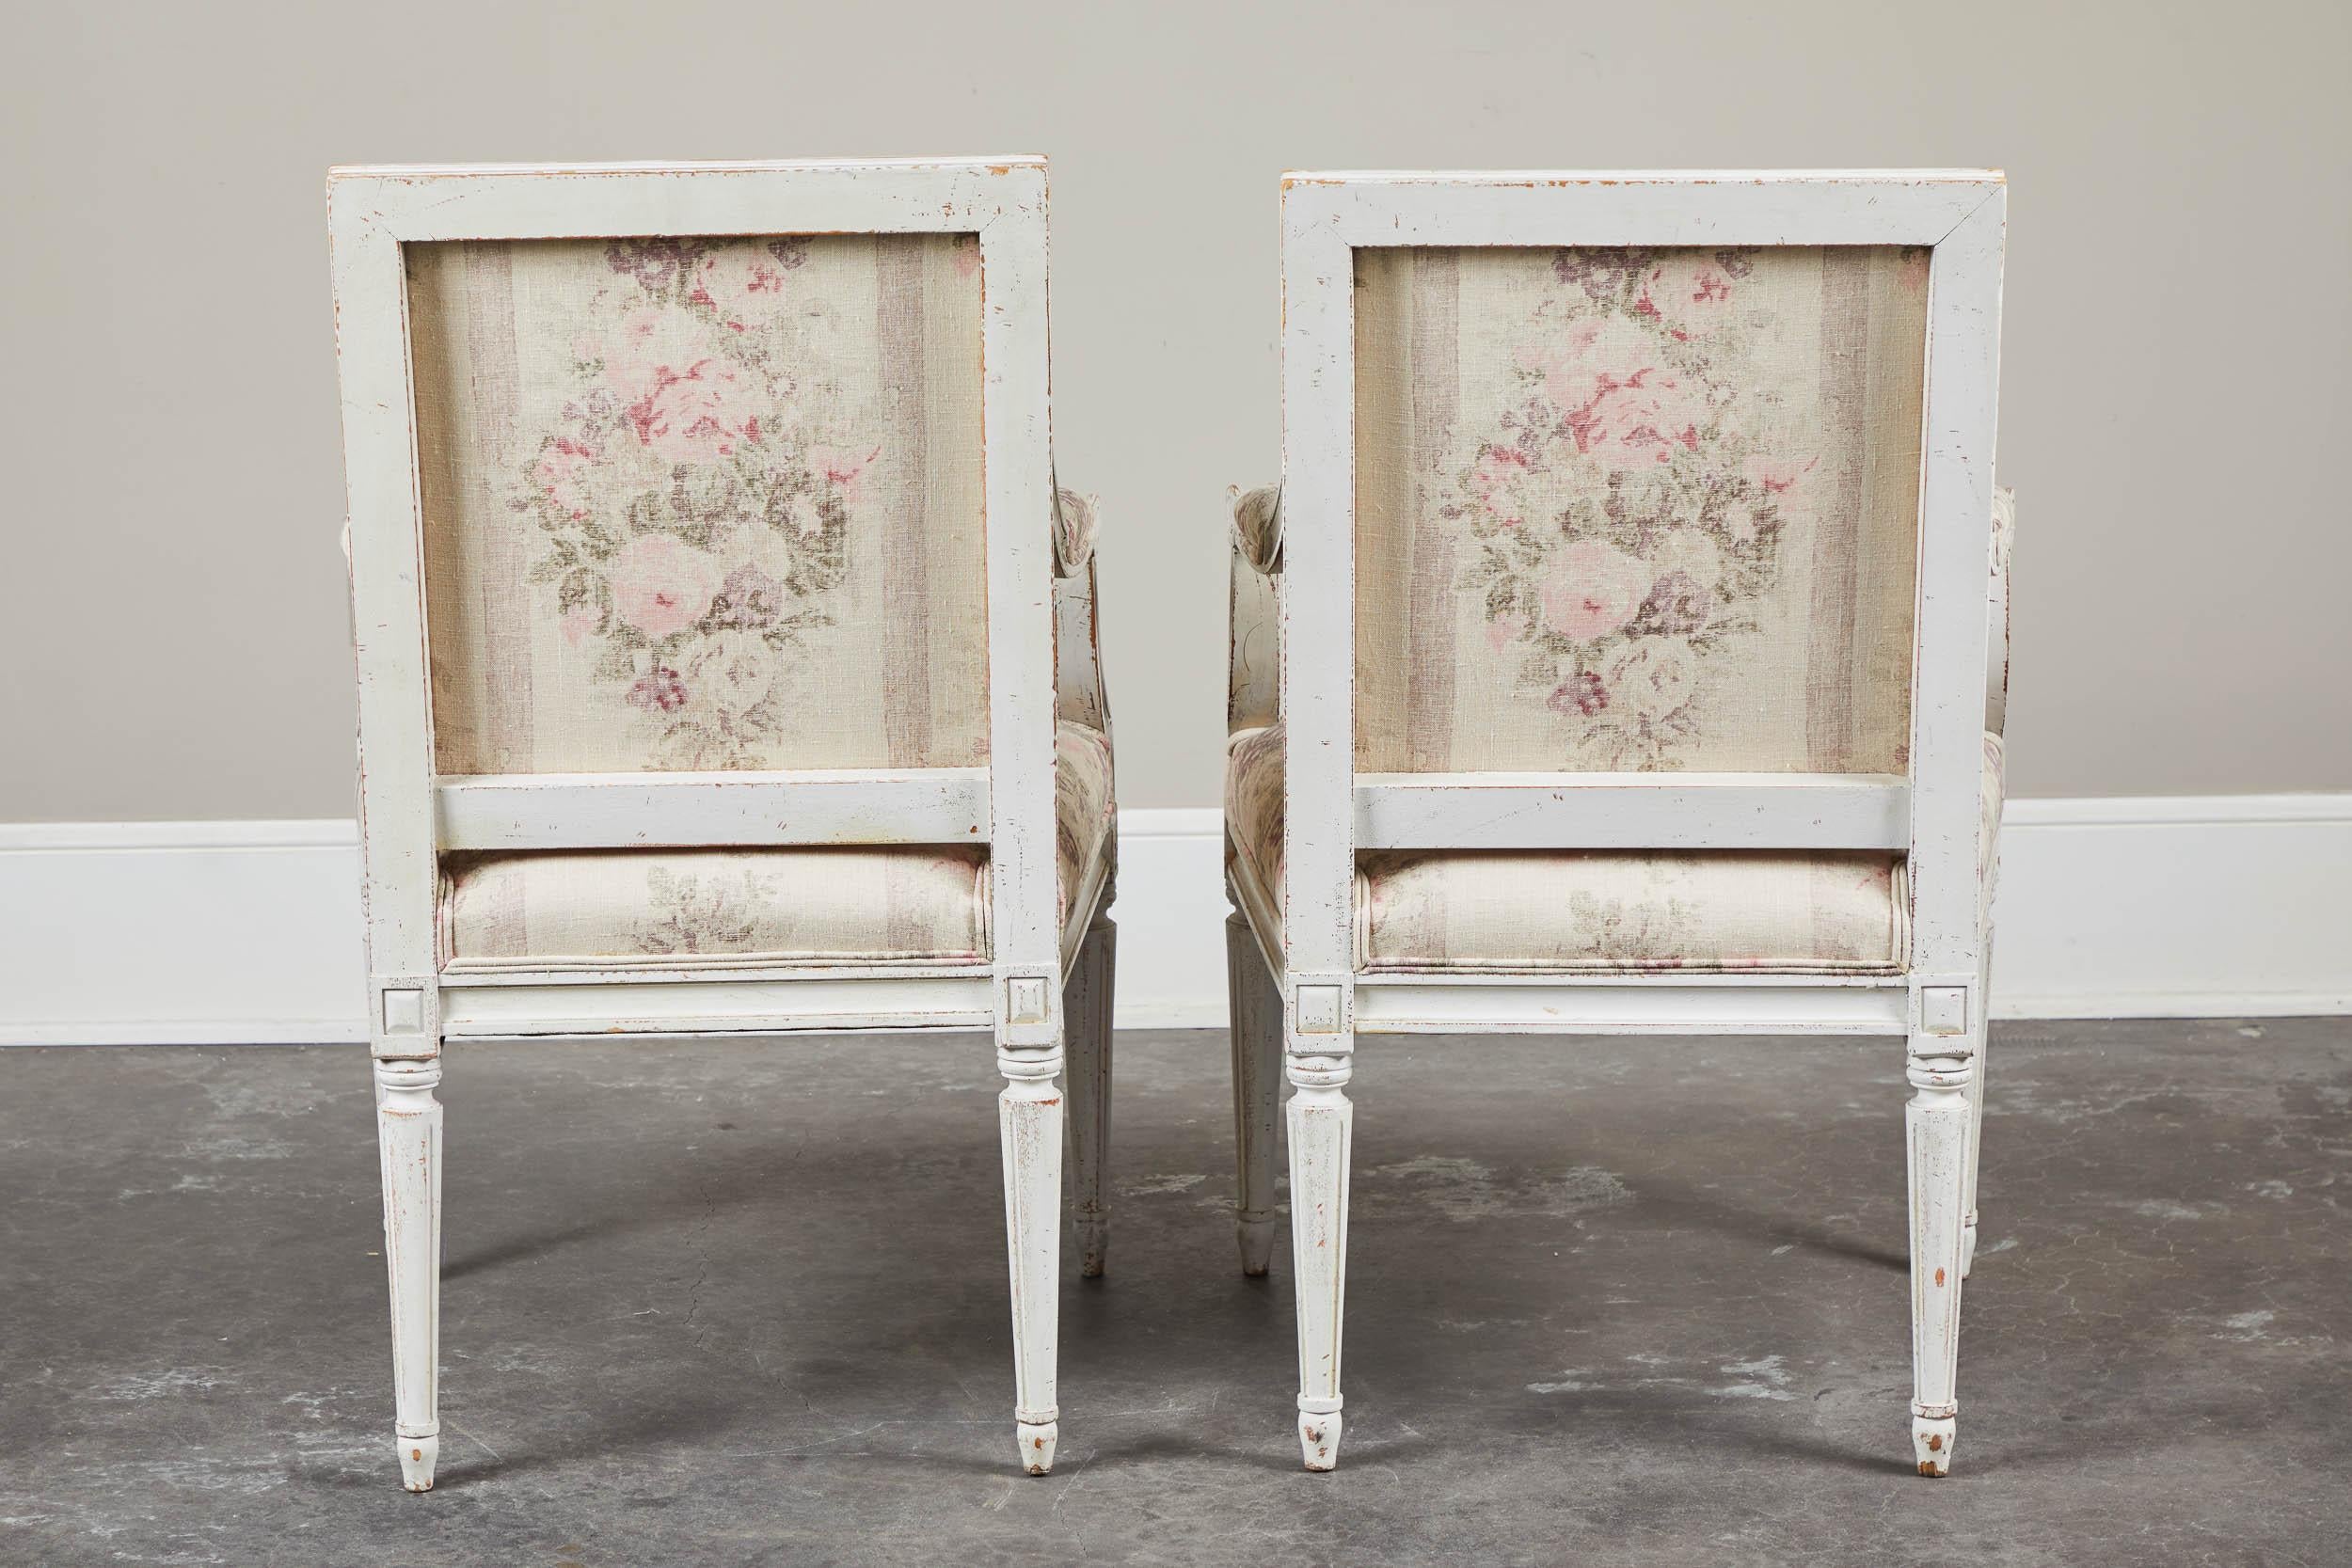 Pair of 18th century white painted Gustavian armchairs with new upholstery. Great antique condition. Versatile uses; as a desk chair, reading chair in bedroom, vanity seating or simply a place to put your purse down in an entryway.